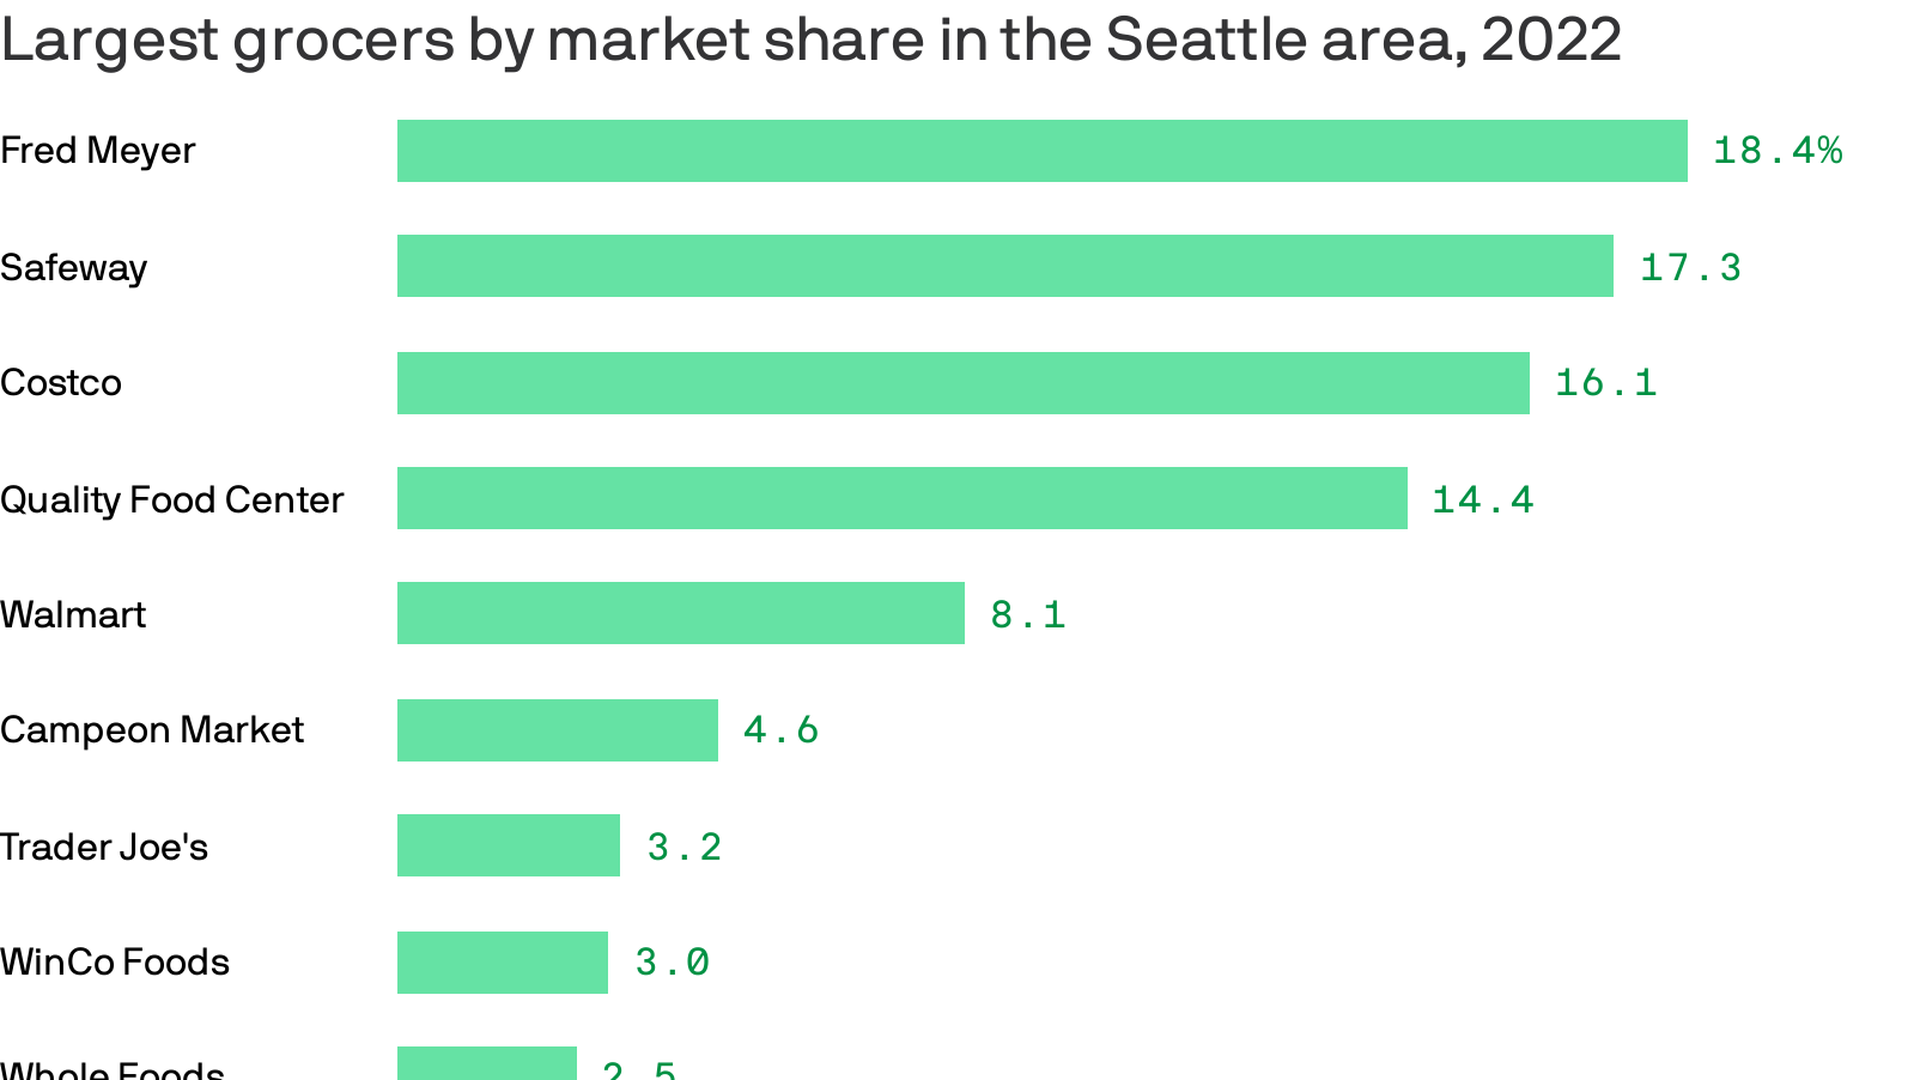 A bar chart showing Fred Meyer having the largest market share in the Seattle area followed by Safeway, Costco, and QFC.